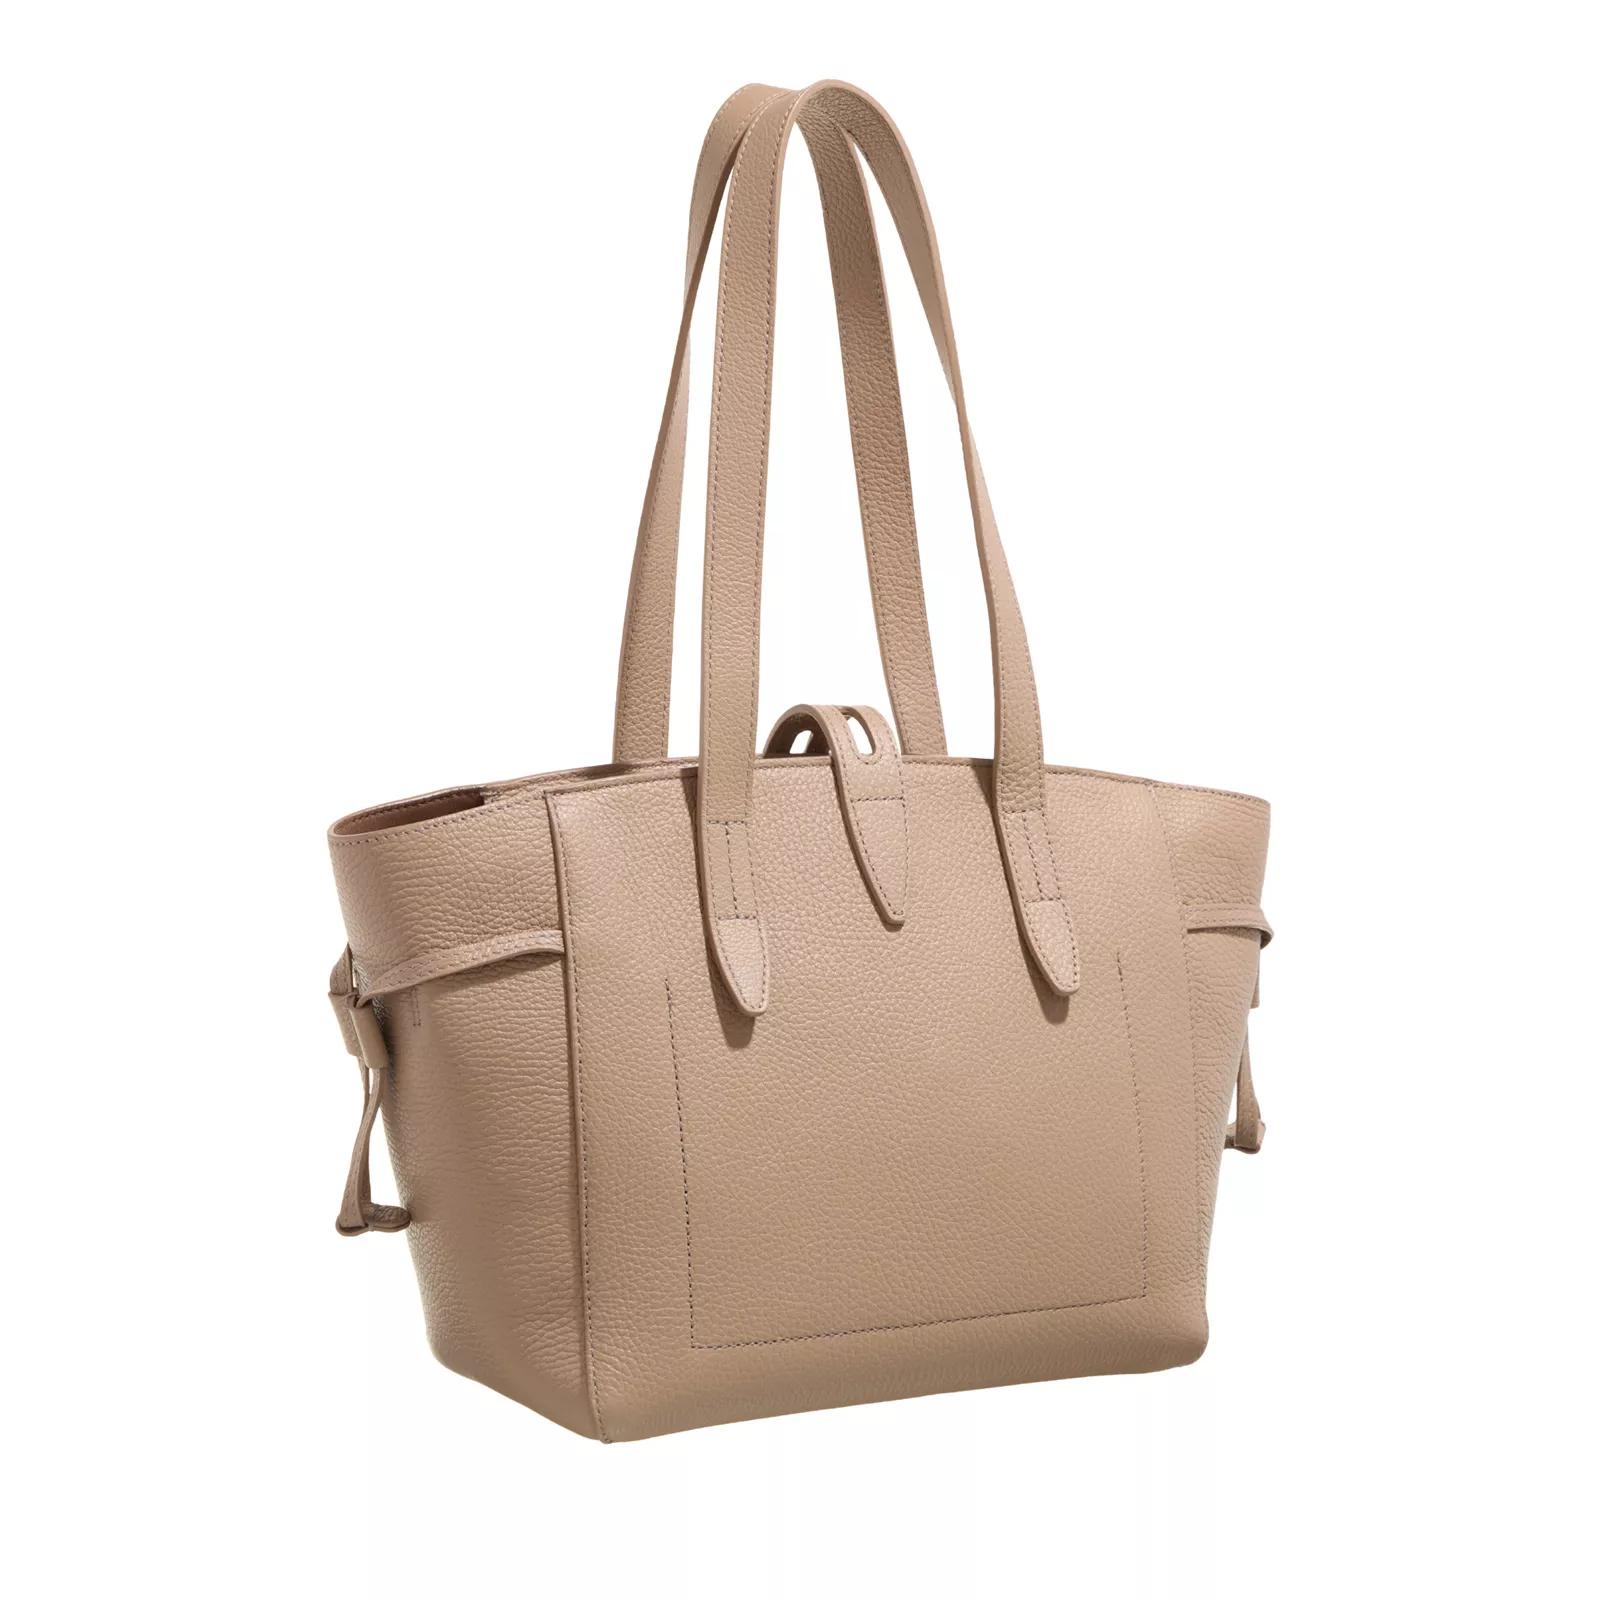 Furla Shoppers Net S Tote 24 in taupe